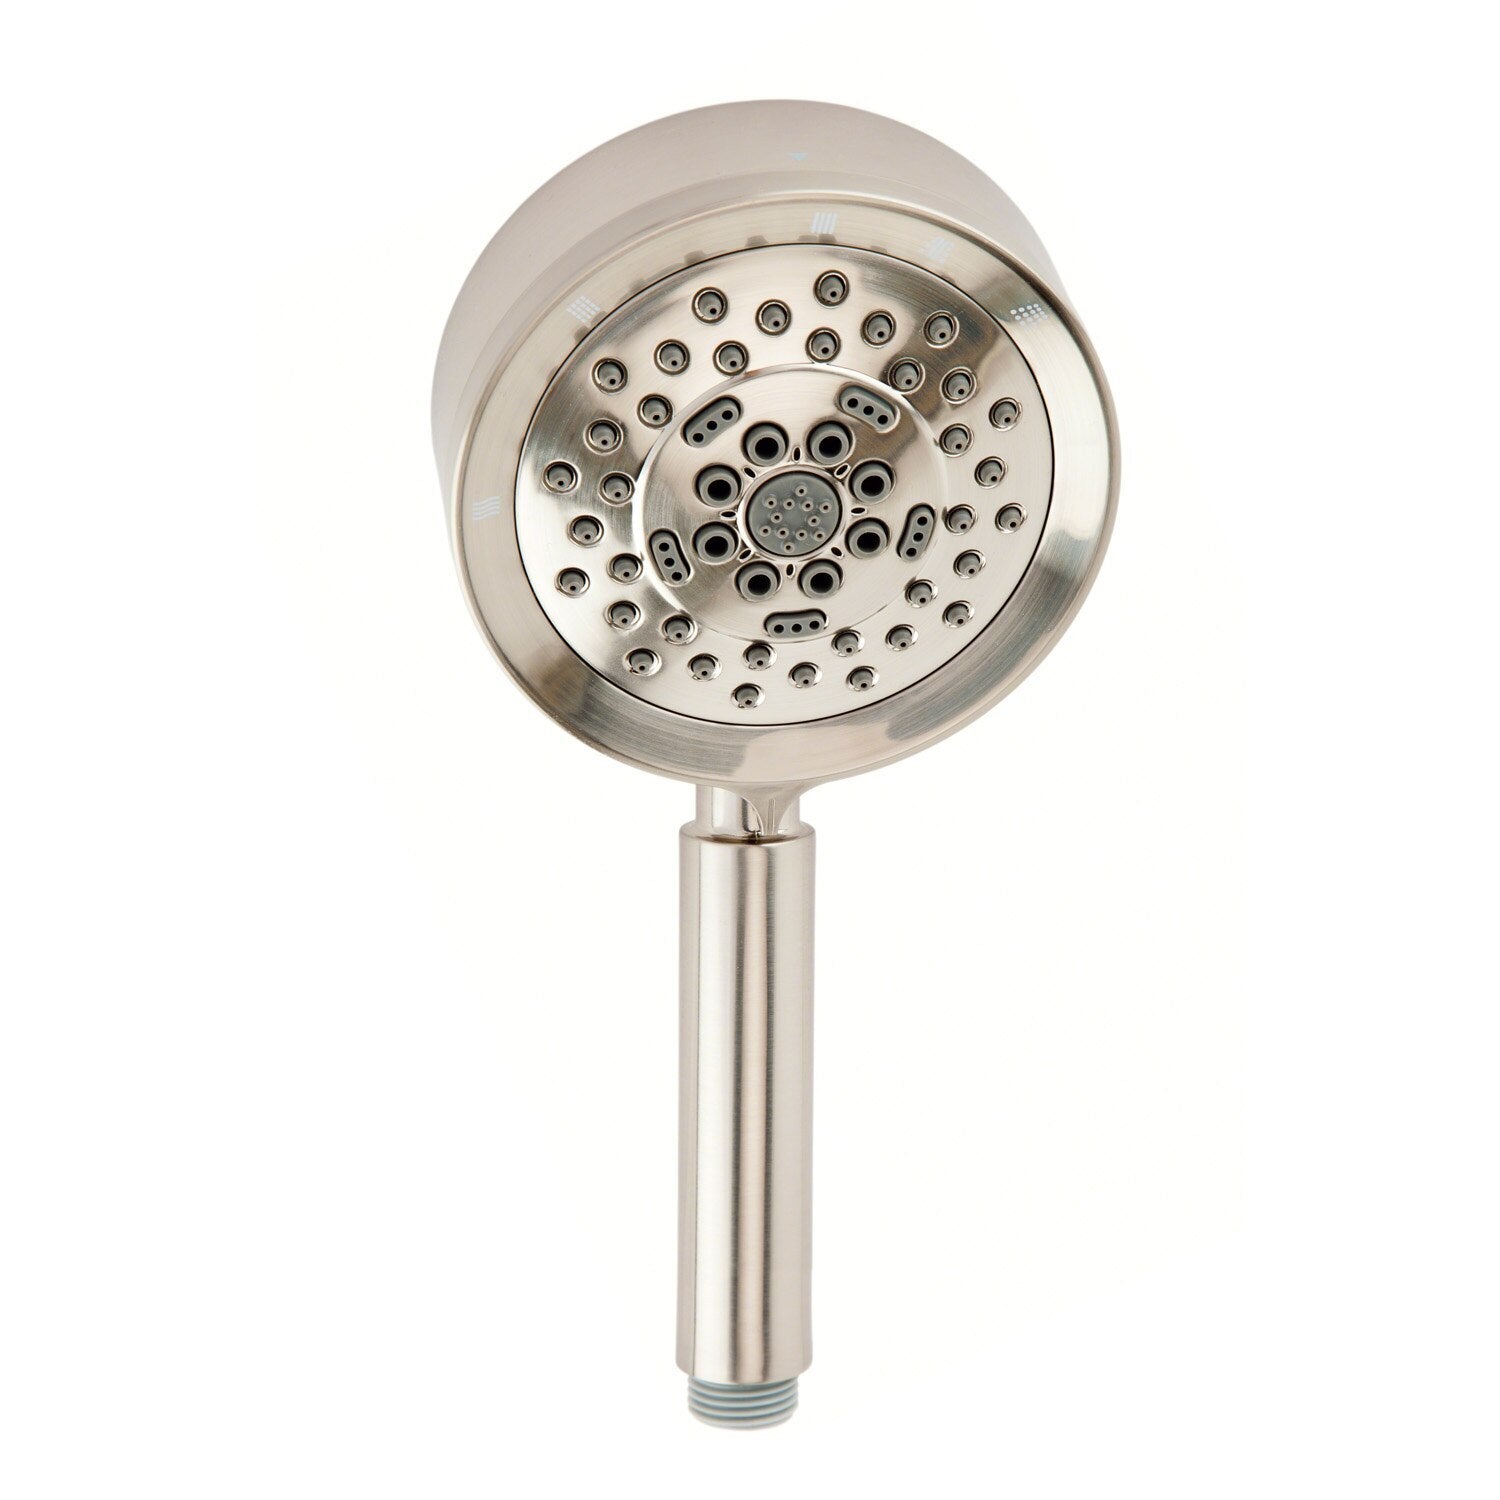 Danze by Gerber Parma 5 Function Handshower 2.0gpm